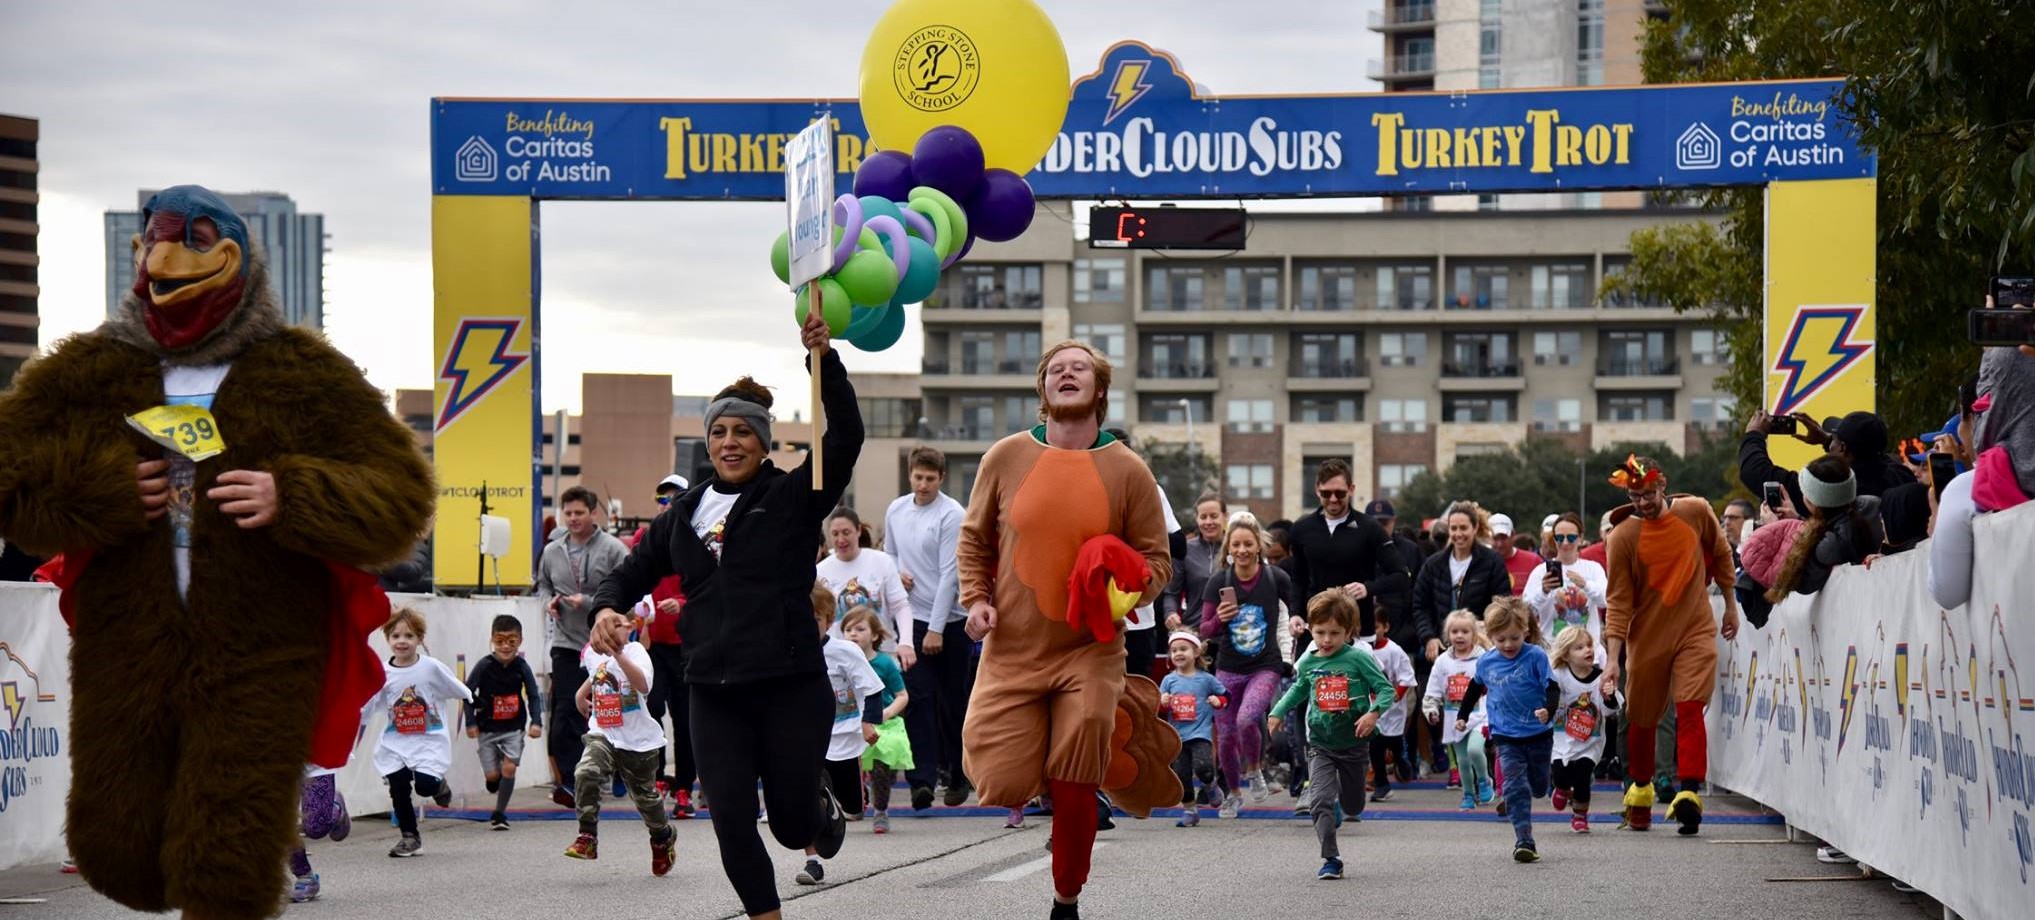 A Behind-The-Scenes Look at the ThunderCloud Subs Turkey Trot